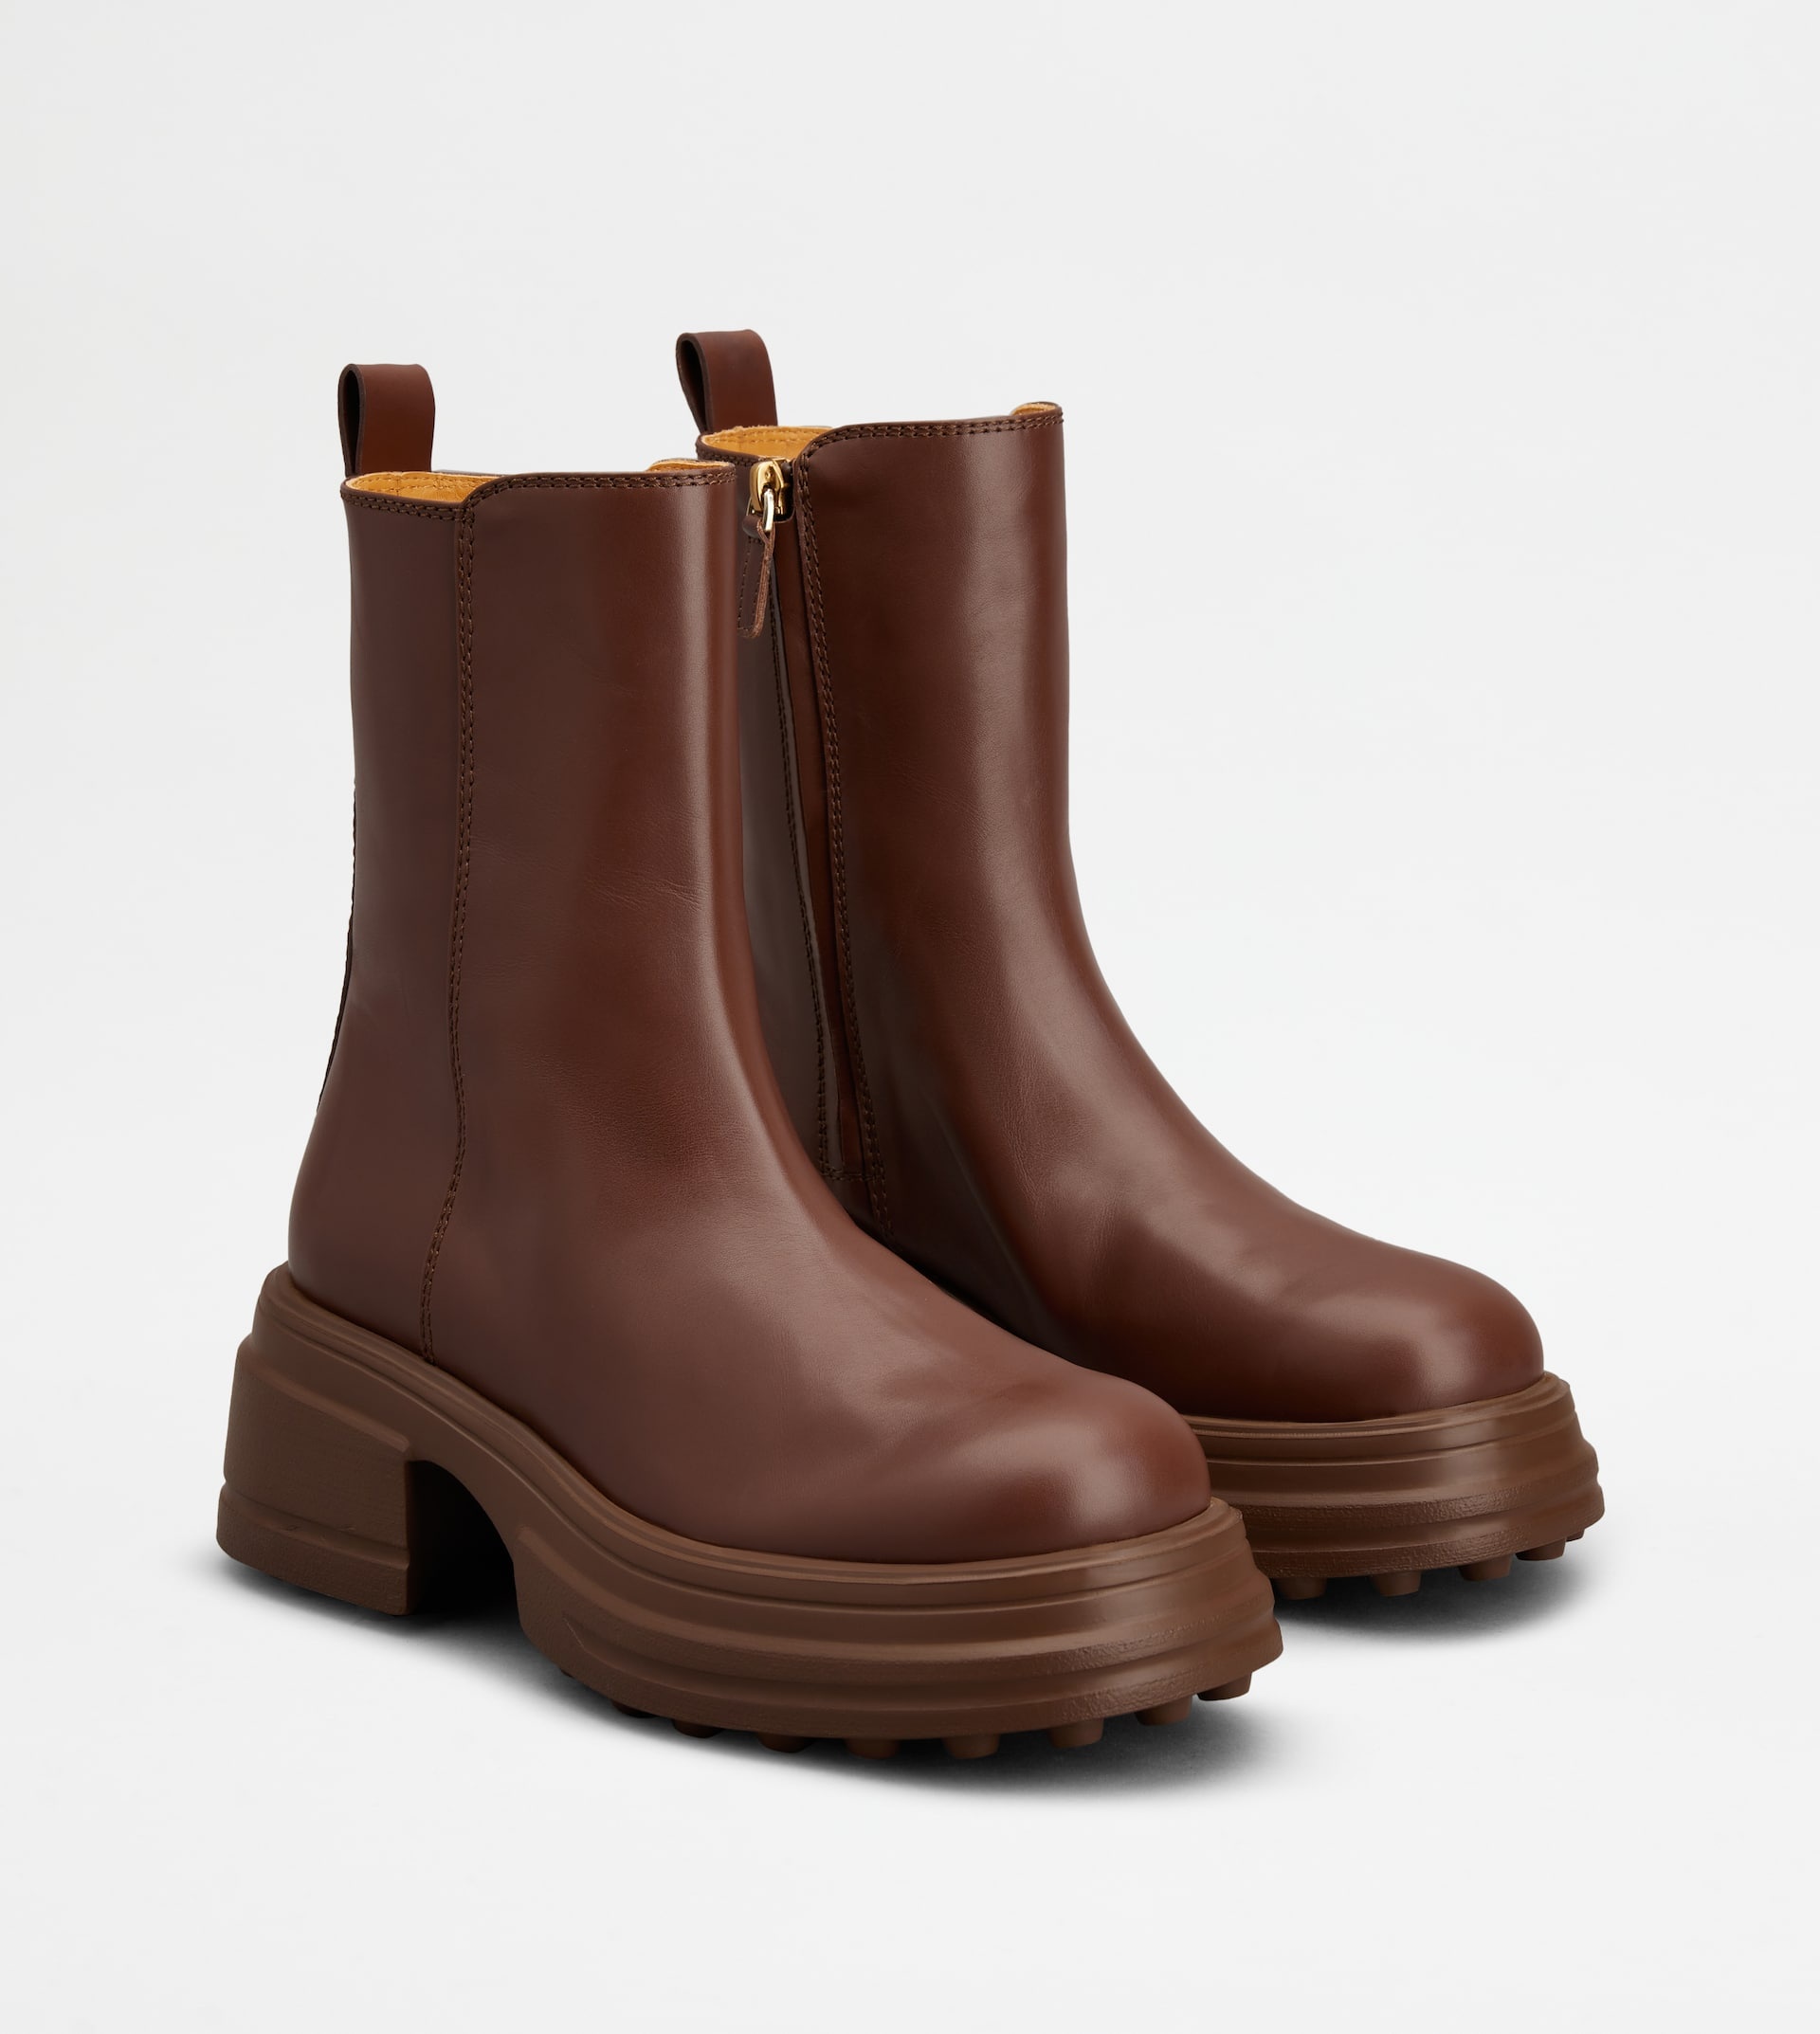 PLATFORM ANKLE BOOTS IN LEATHER - BROWN - 3